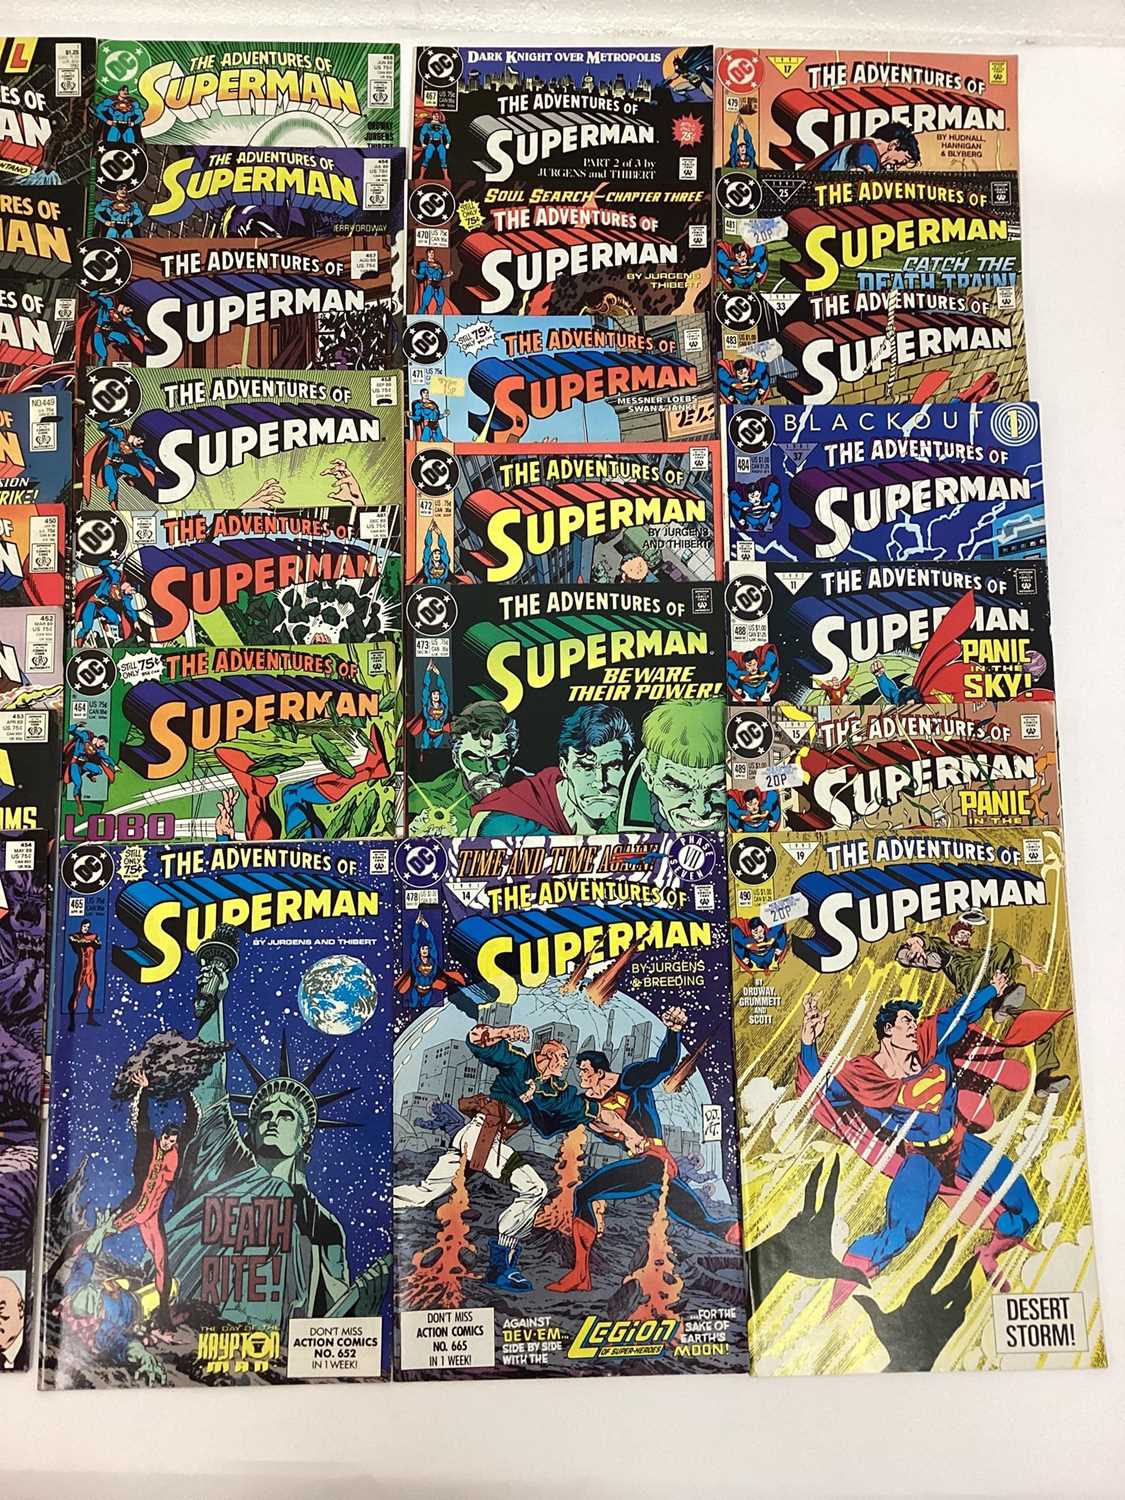 Large quantity of DC Comics, The Adventures of Superman - Image 3 of 9